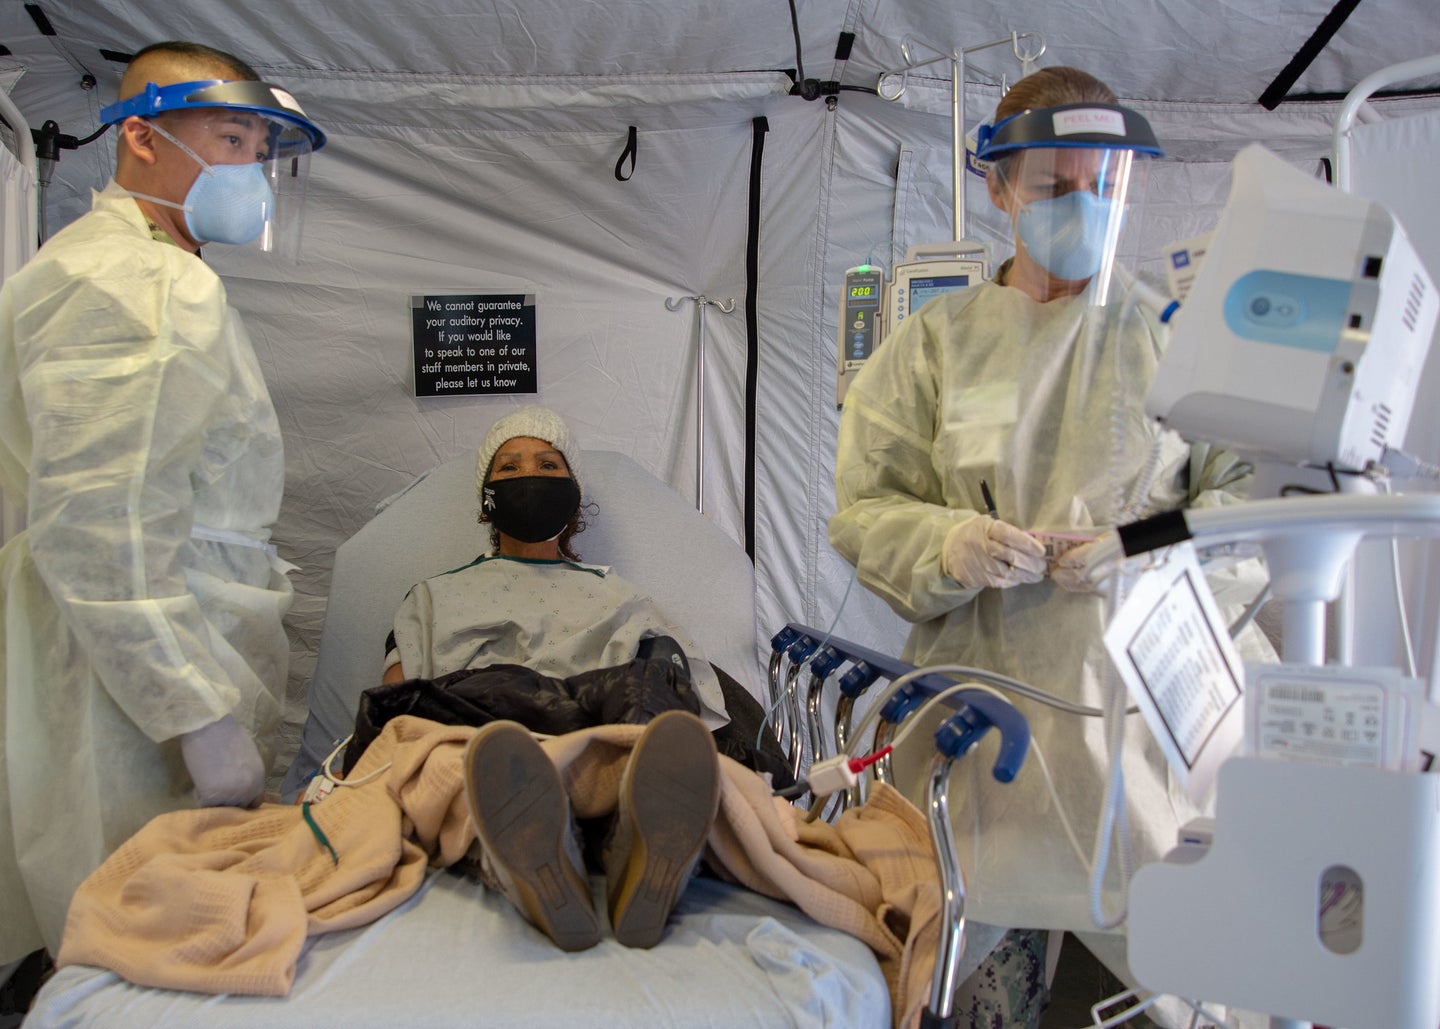 A patient sitting on a hospital bed with an IV, with two medical providers wearing protective clothes on either side.